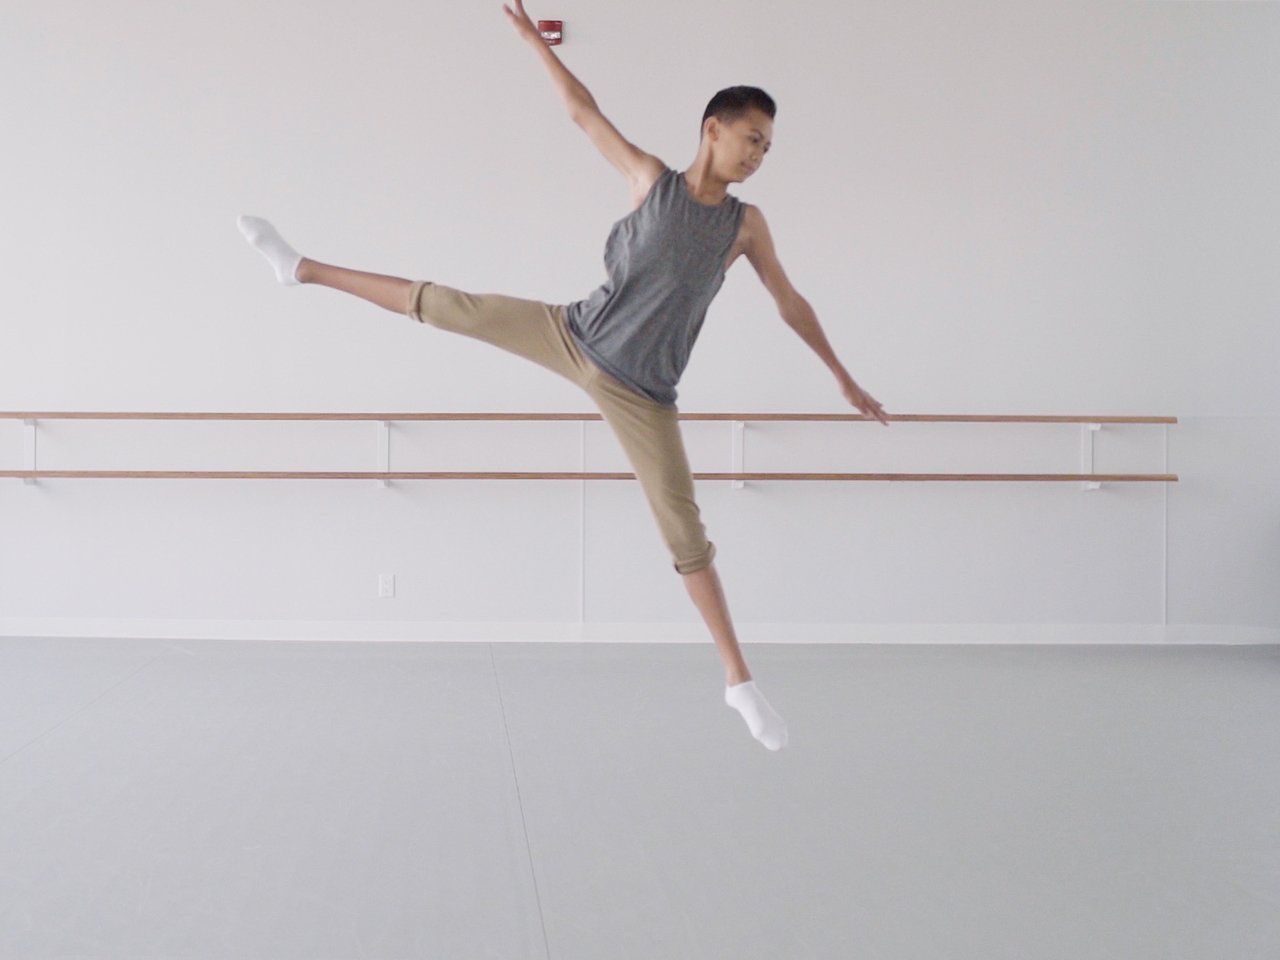 Young boy named Kai in a mid-air dance position